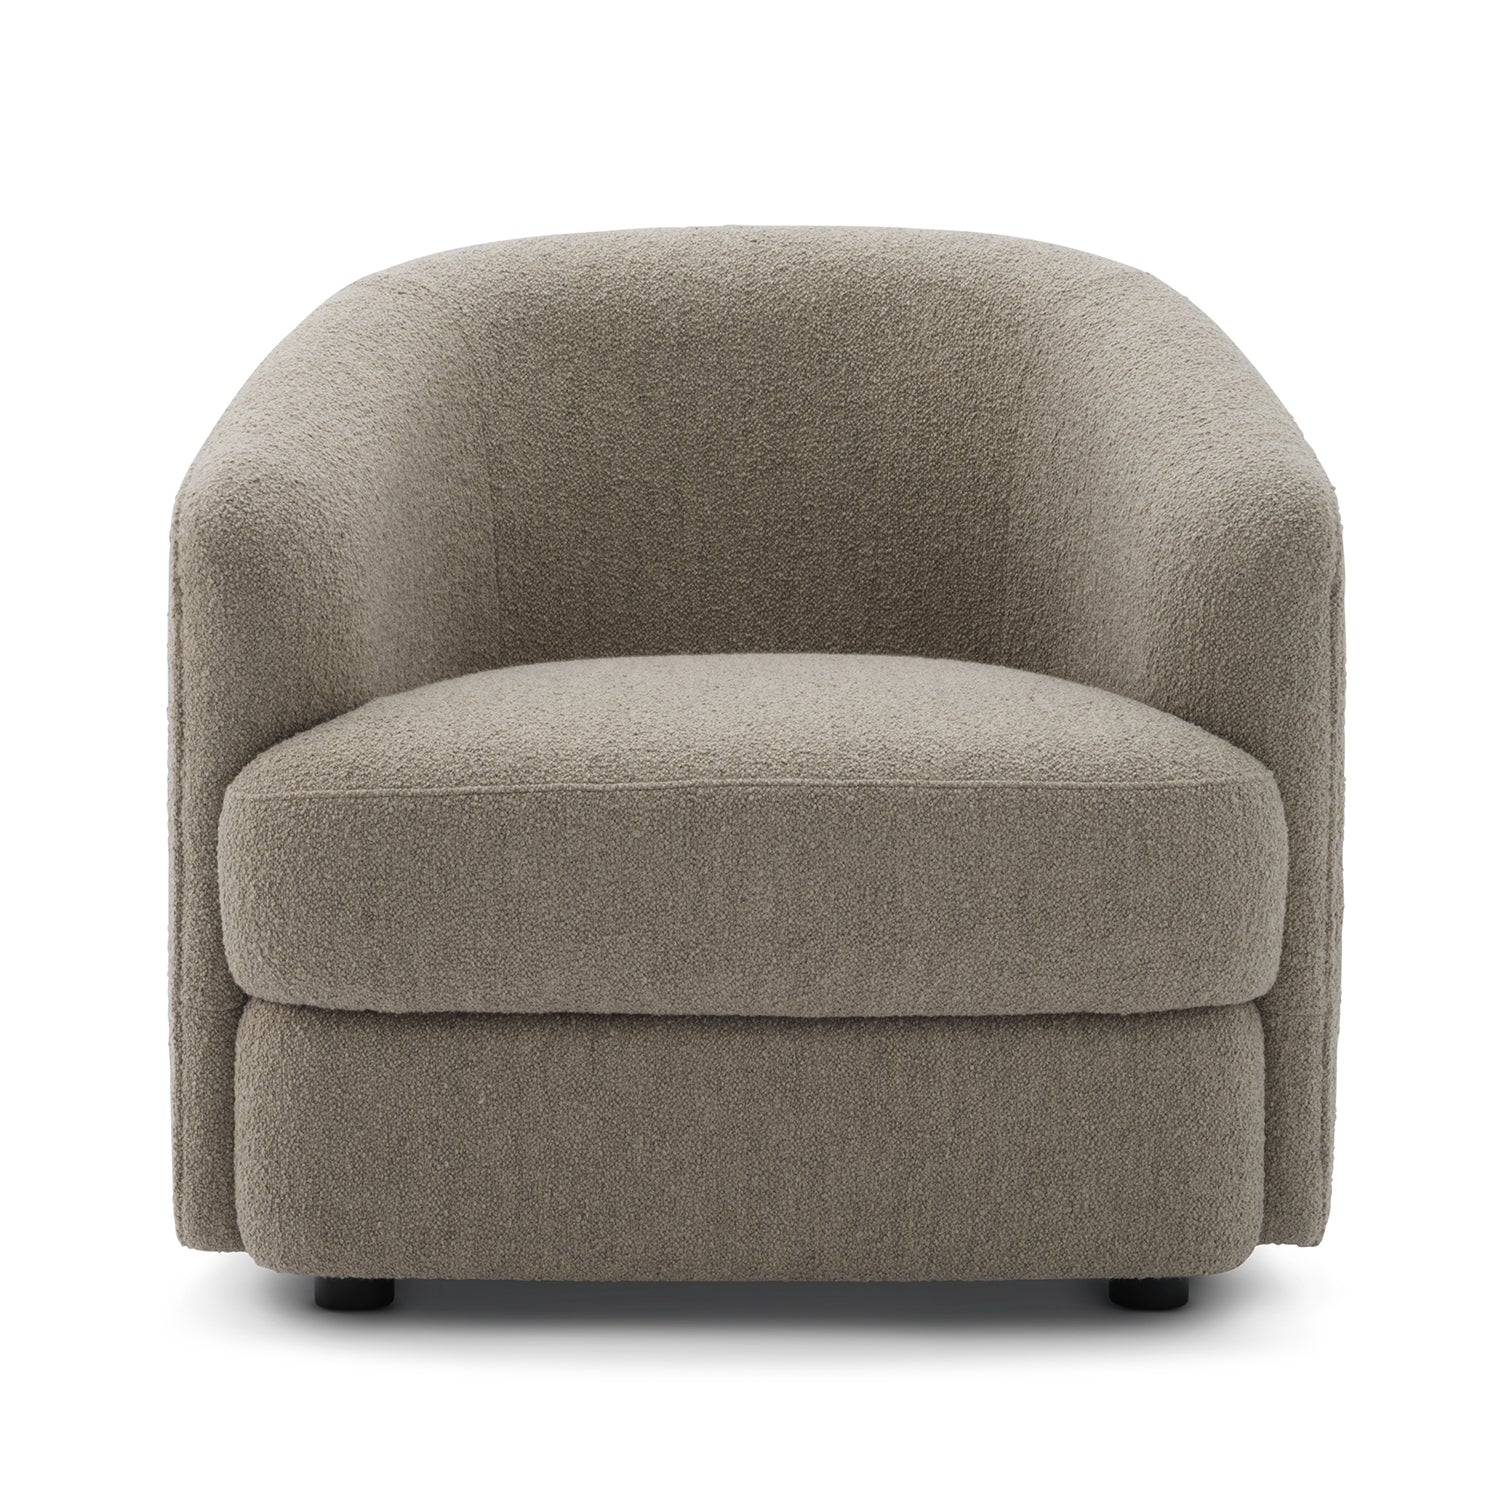 New Works Covent Lounge Chair in hemp